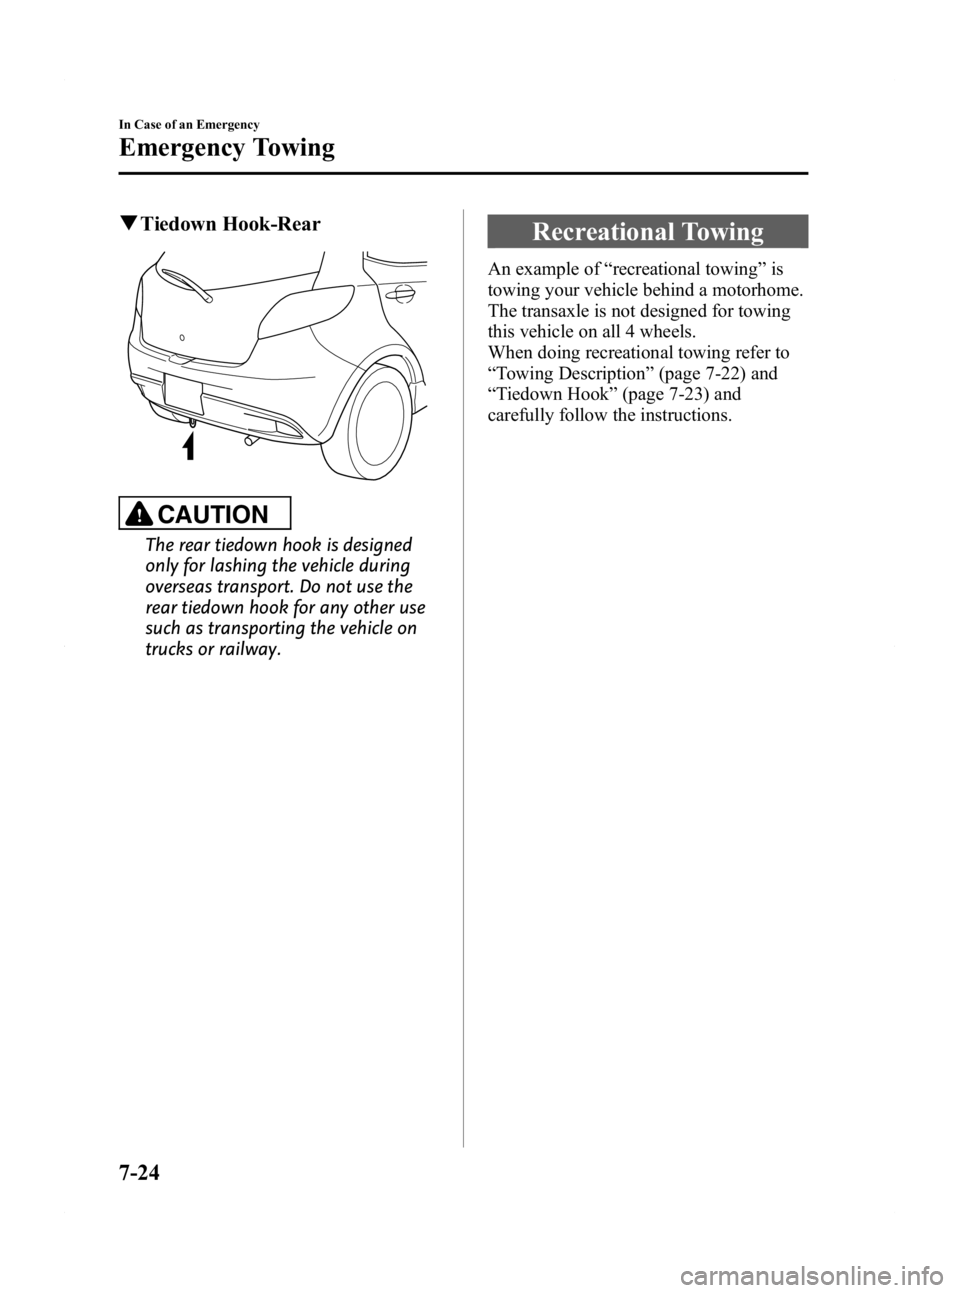 MAZDA MODEL 2 2011  Owners Manual Black plate (232,1)
qTiedown Hook-Rear
CAUTION
The rear tiedown hook is designed
only for lashing the vehicle during
overseas transport. Do not use the
rear tiedown hook for any other use
such as tran